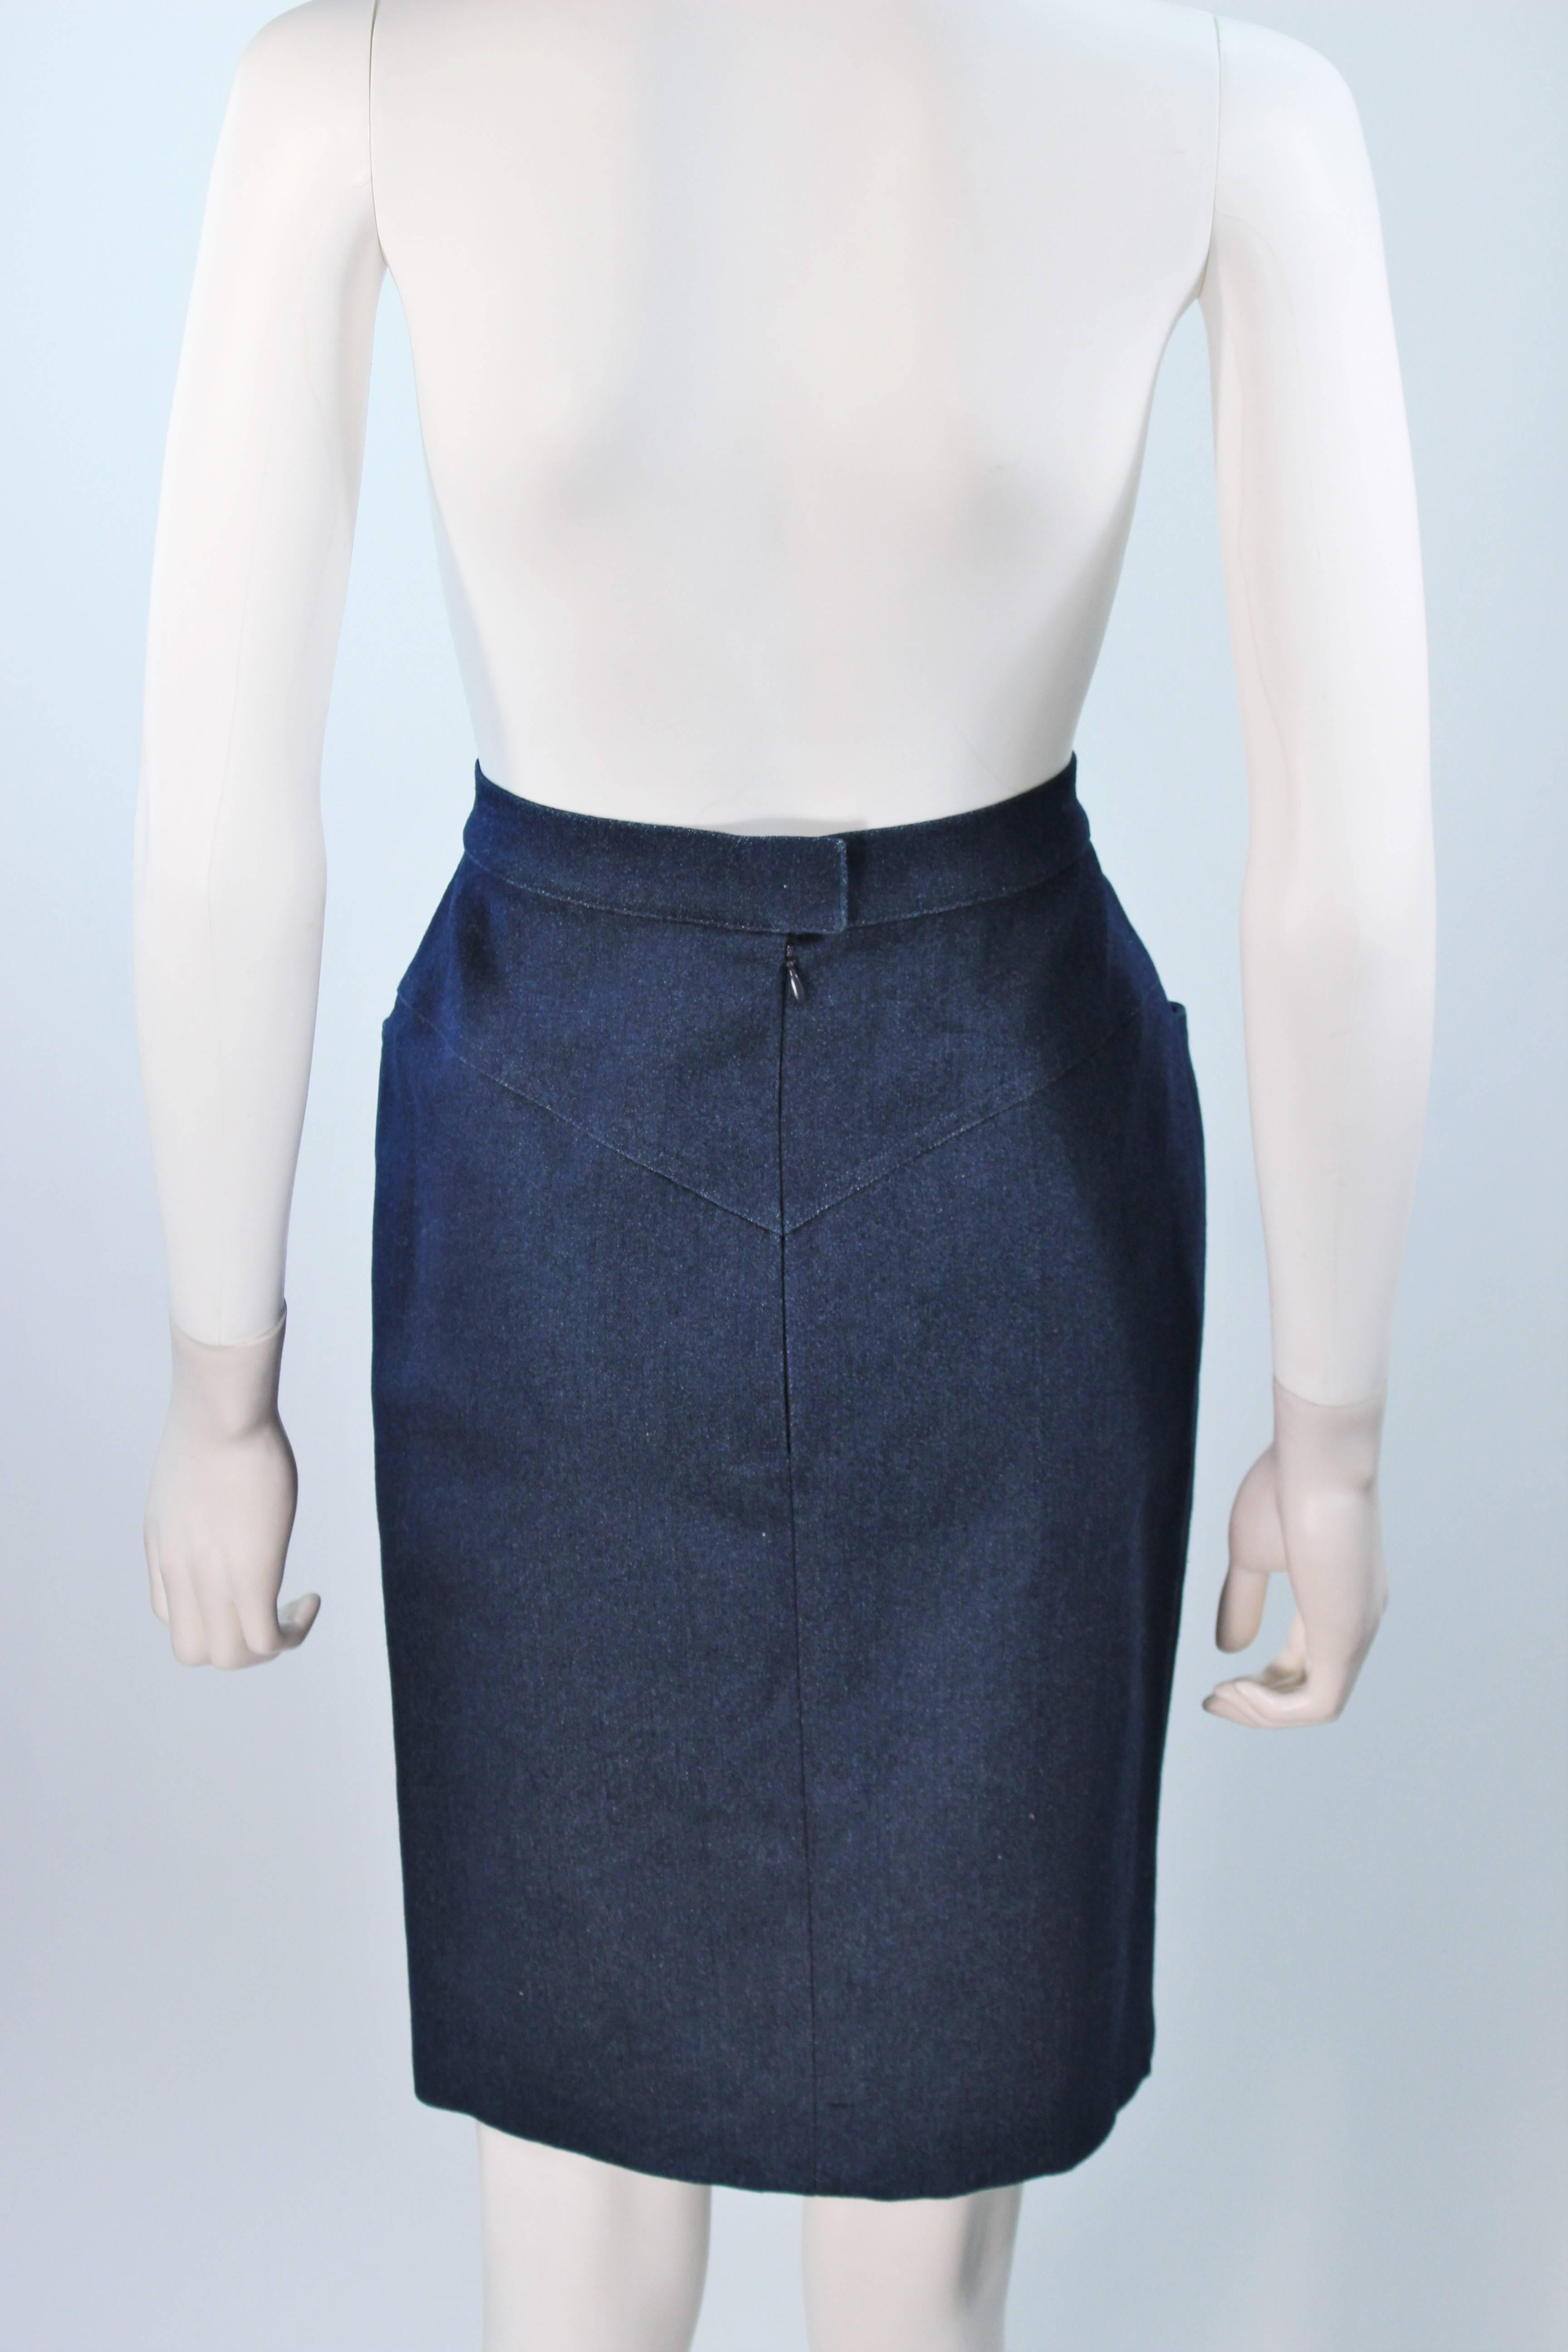 CHANEL Stretch Denim Skirt with Buttons Size 6 4